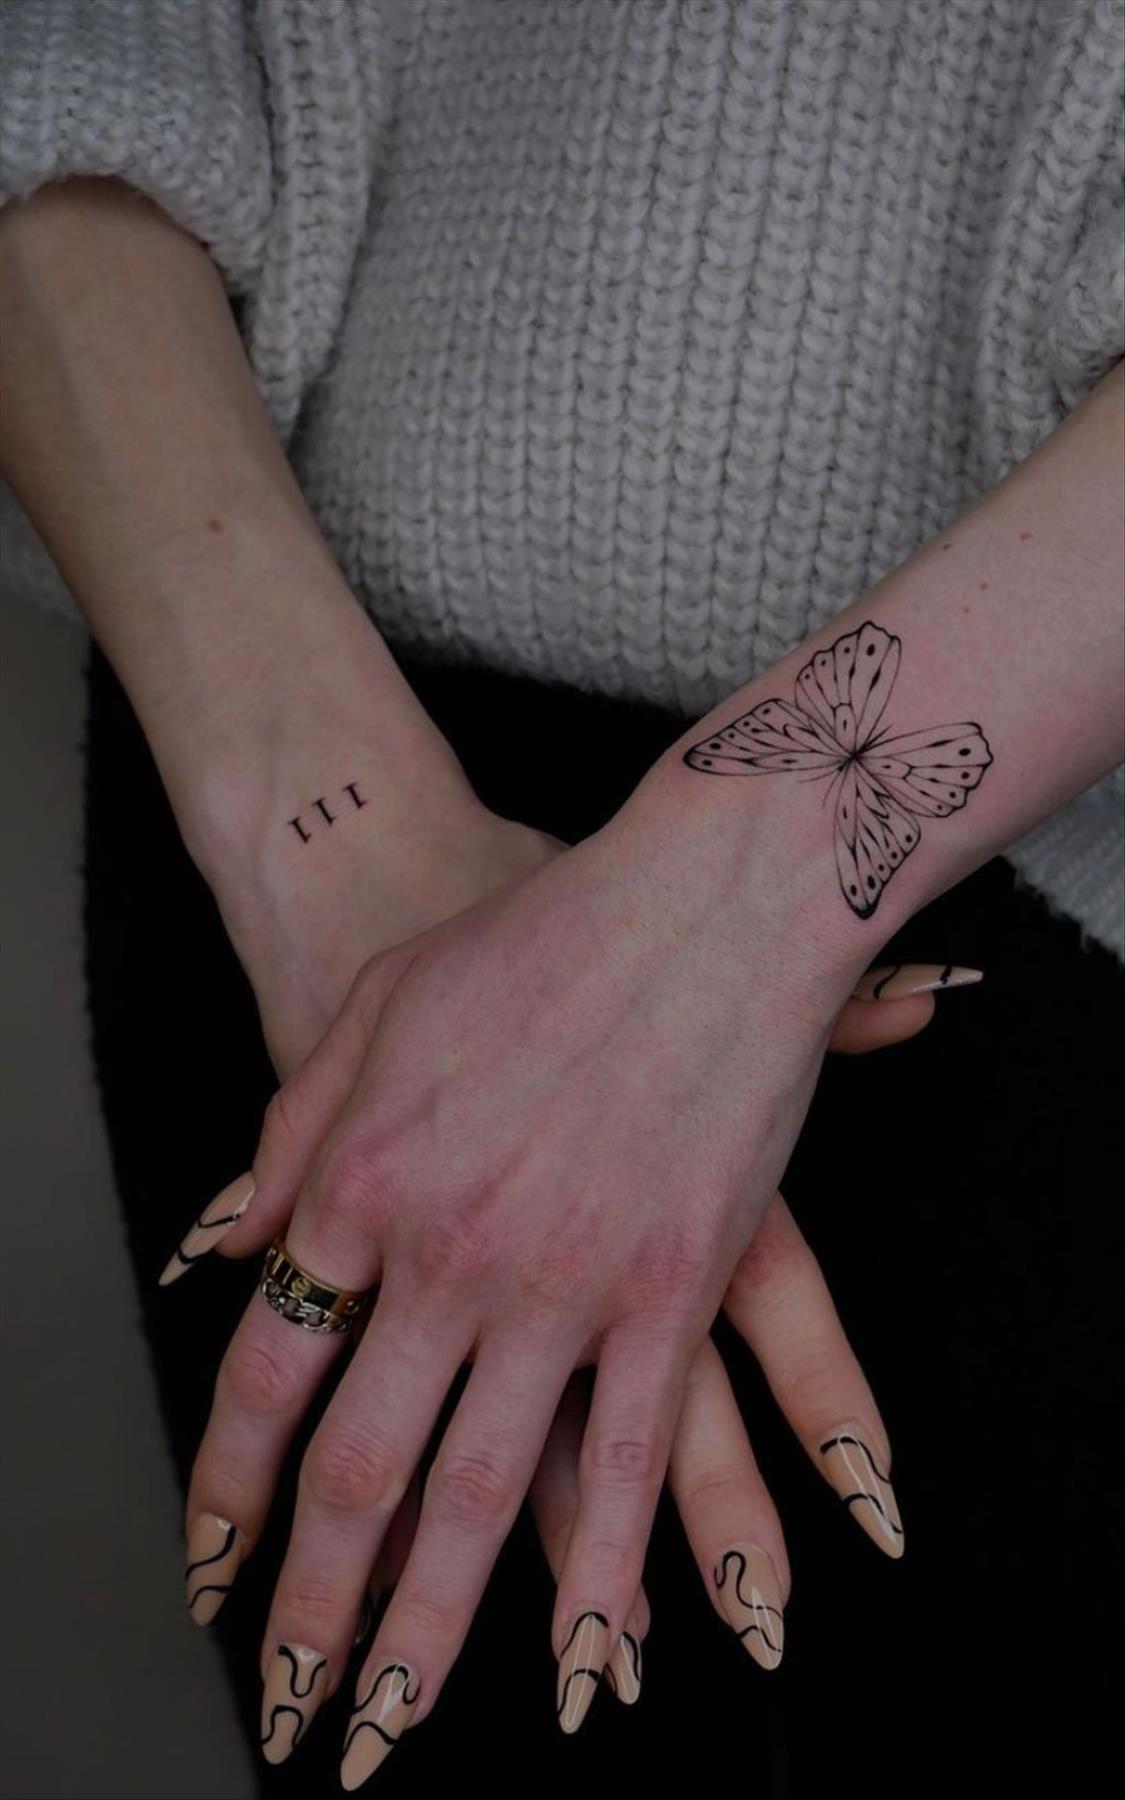 Excellent tattoo designs for women in 2022